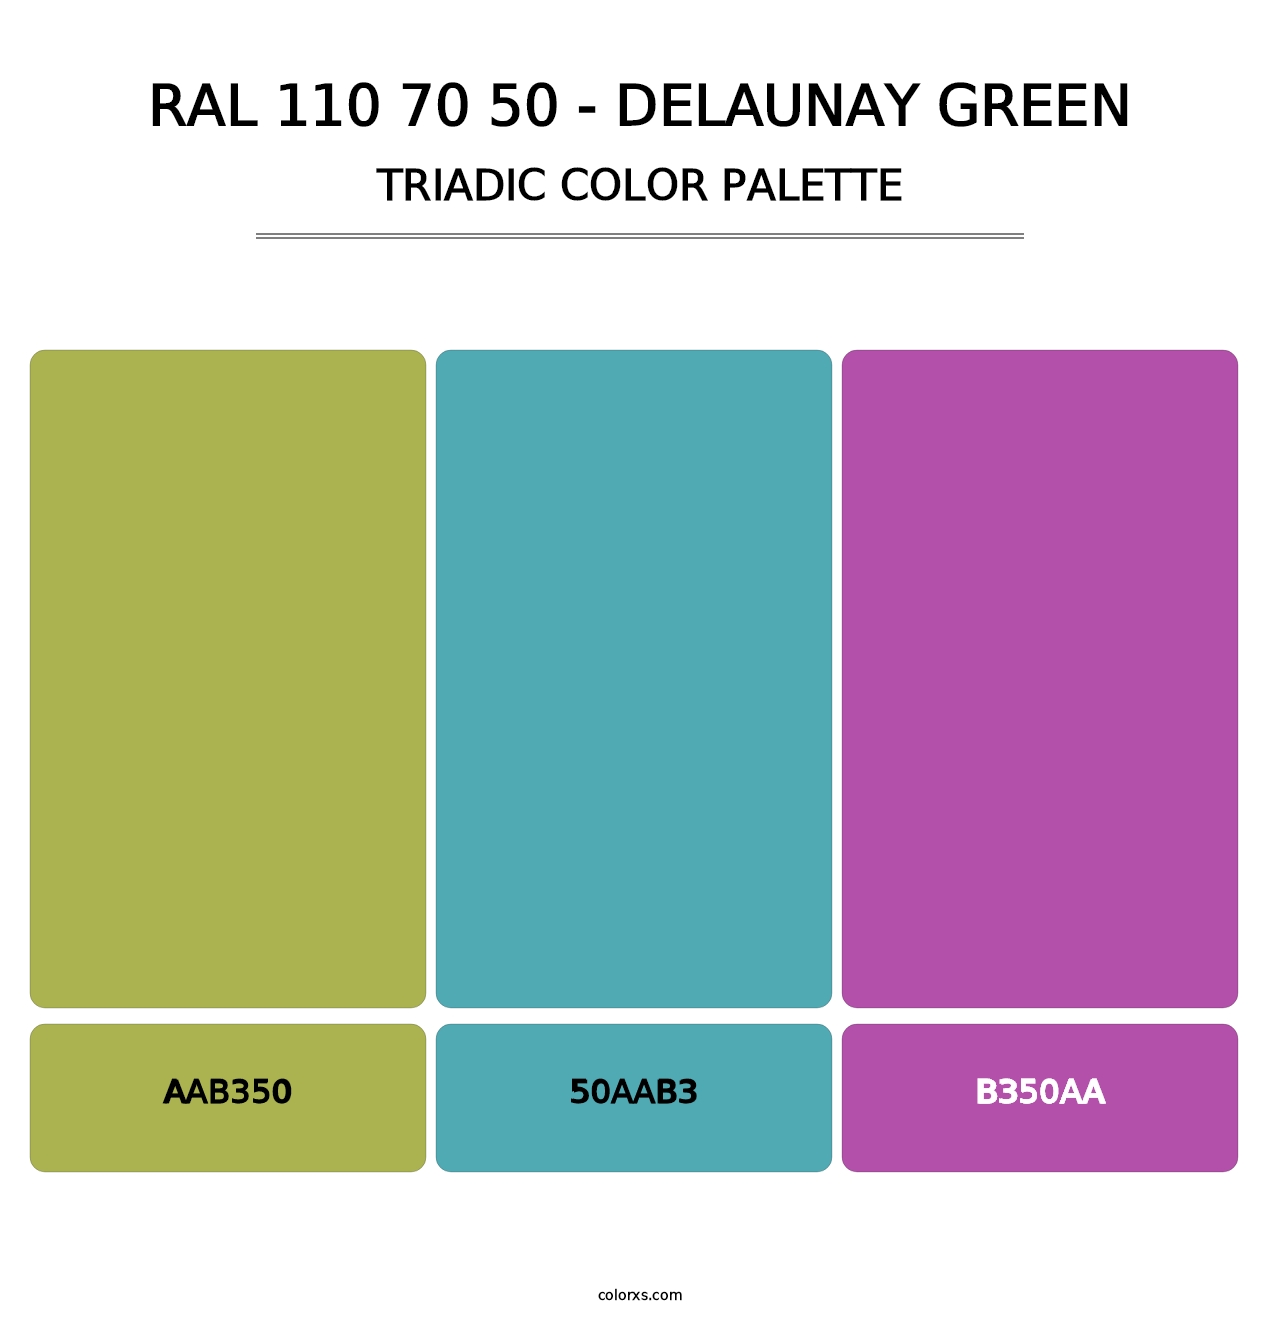 RAL 110 70 50 - Delaunay Green - Triadic Color Palette